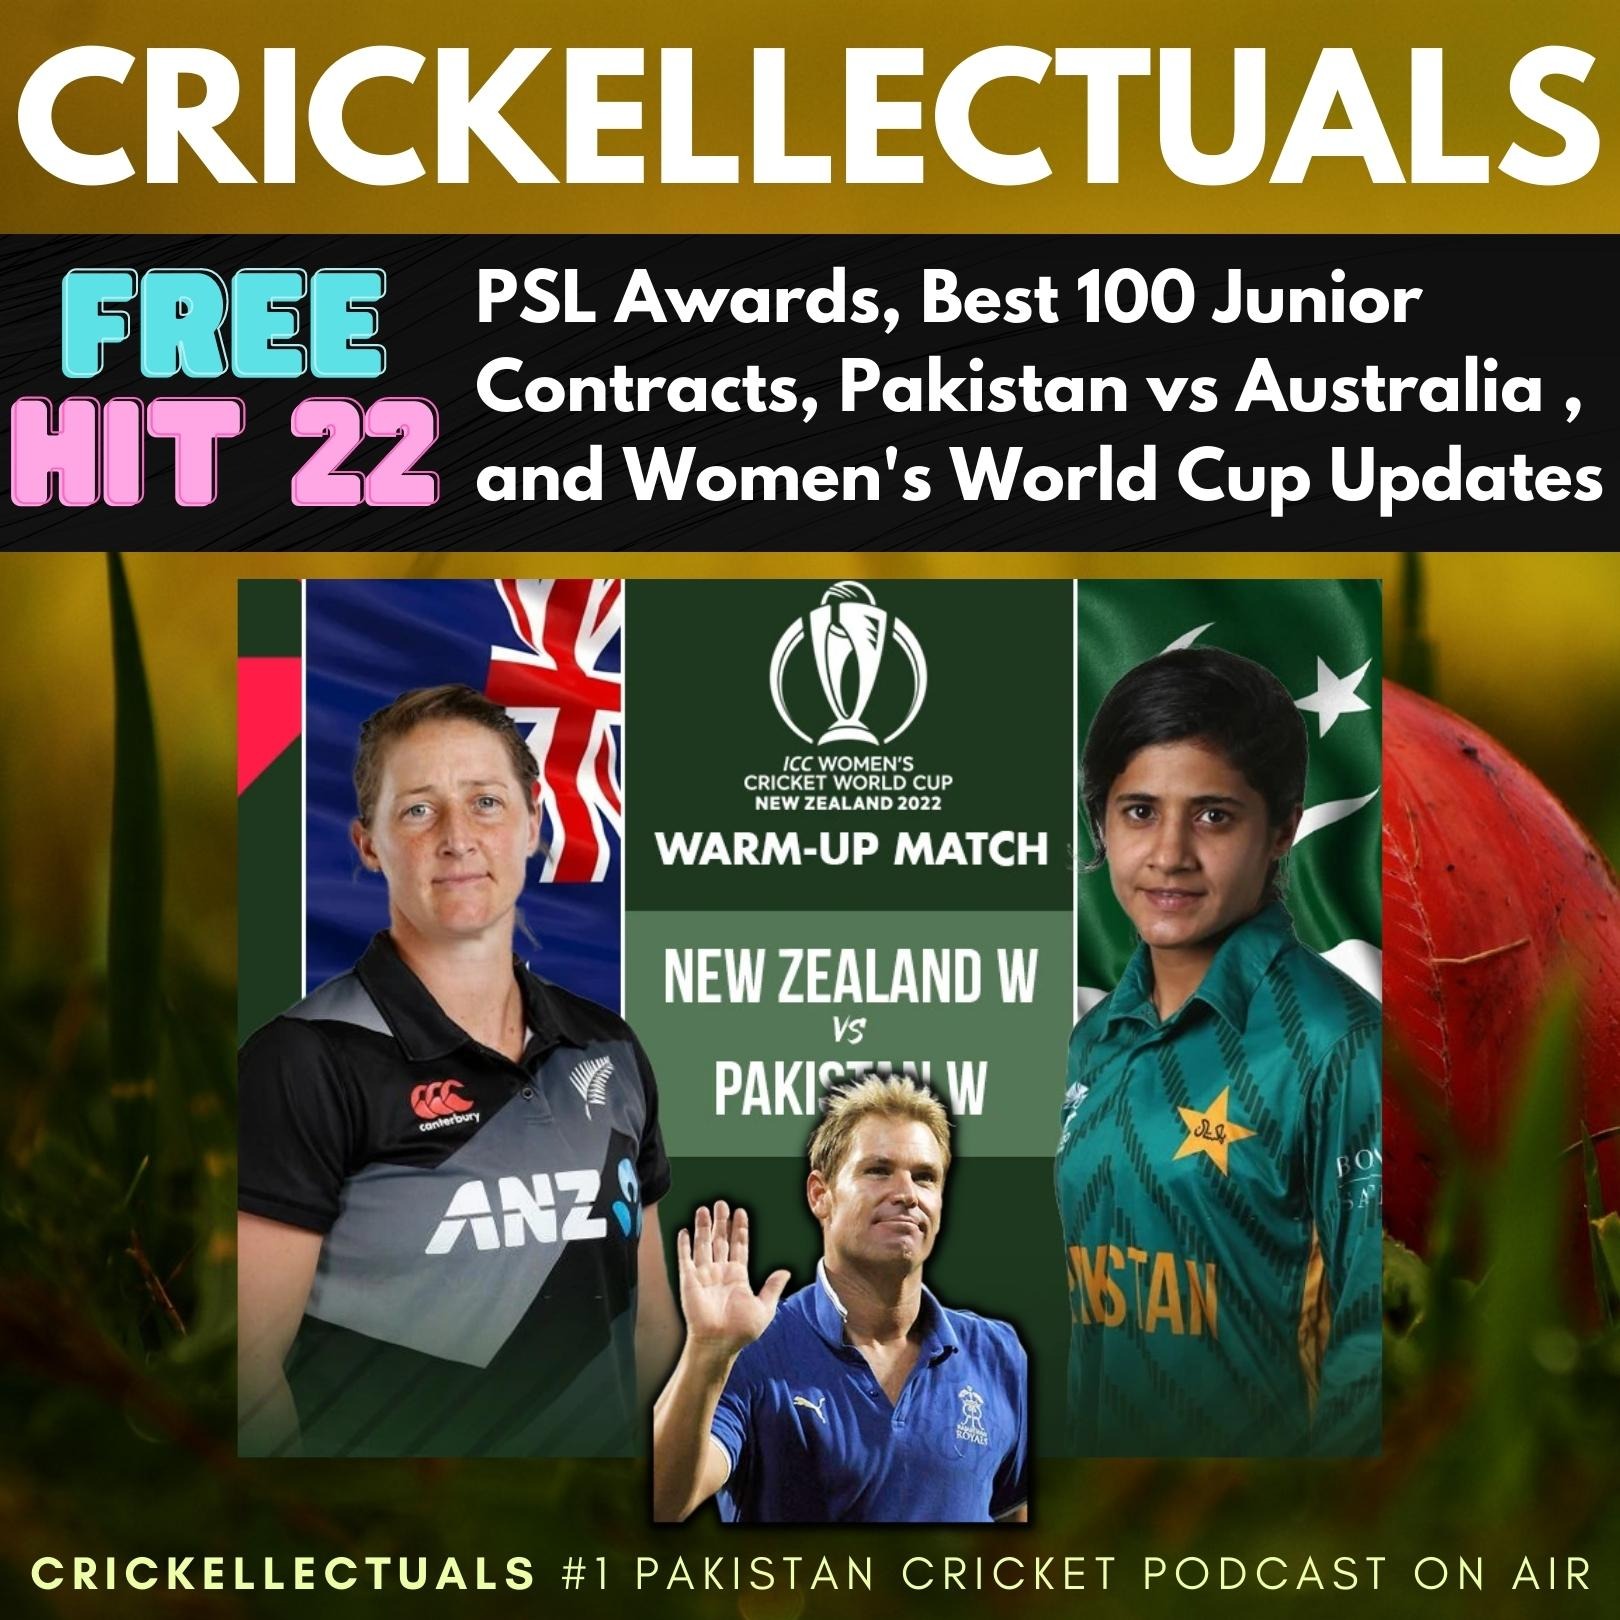 Free Hit 22: PSL Awards, Best 100 Junior Contracts, Pakistan vs Australia Test Series, and Women's World Cup Updates